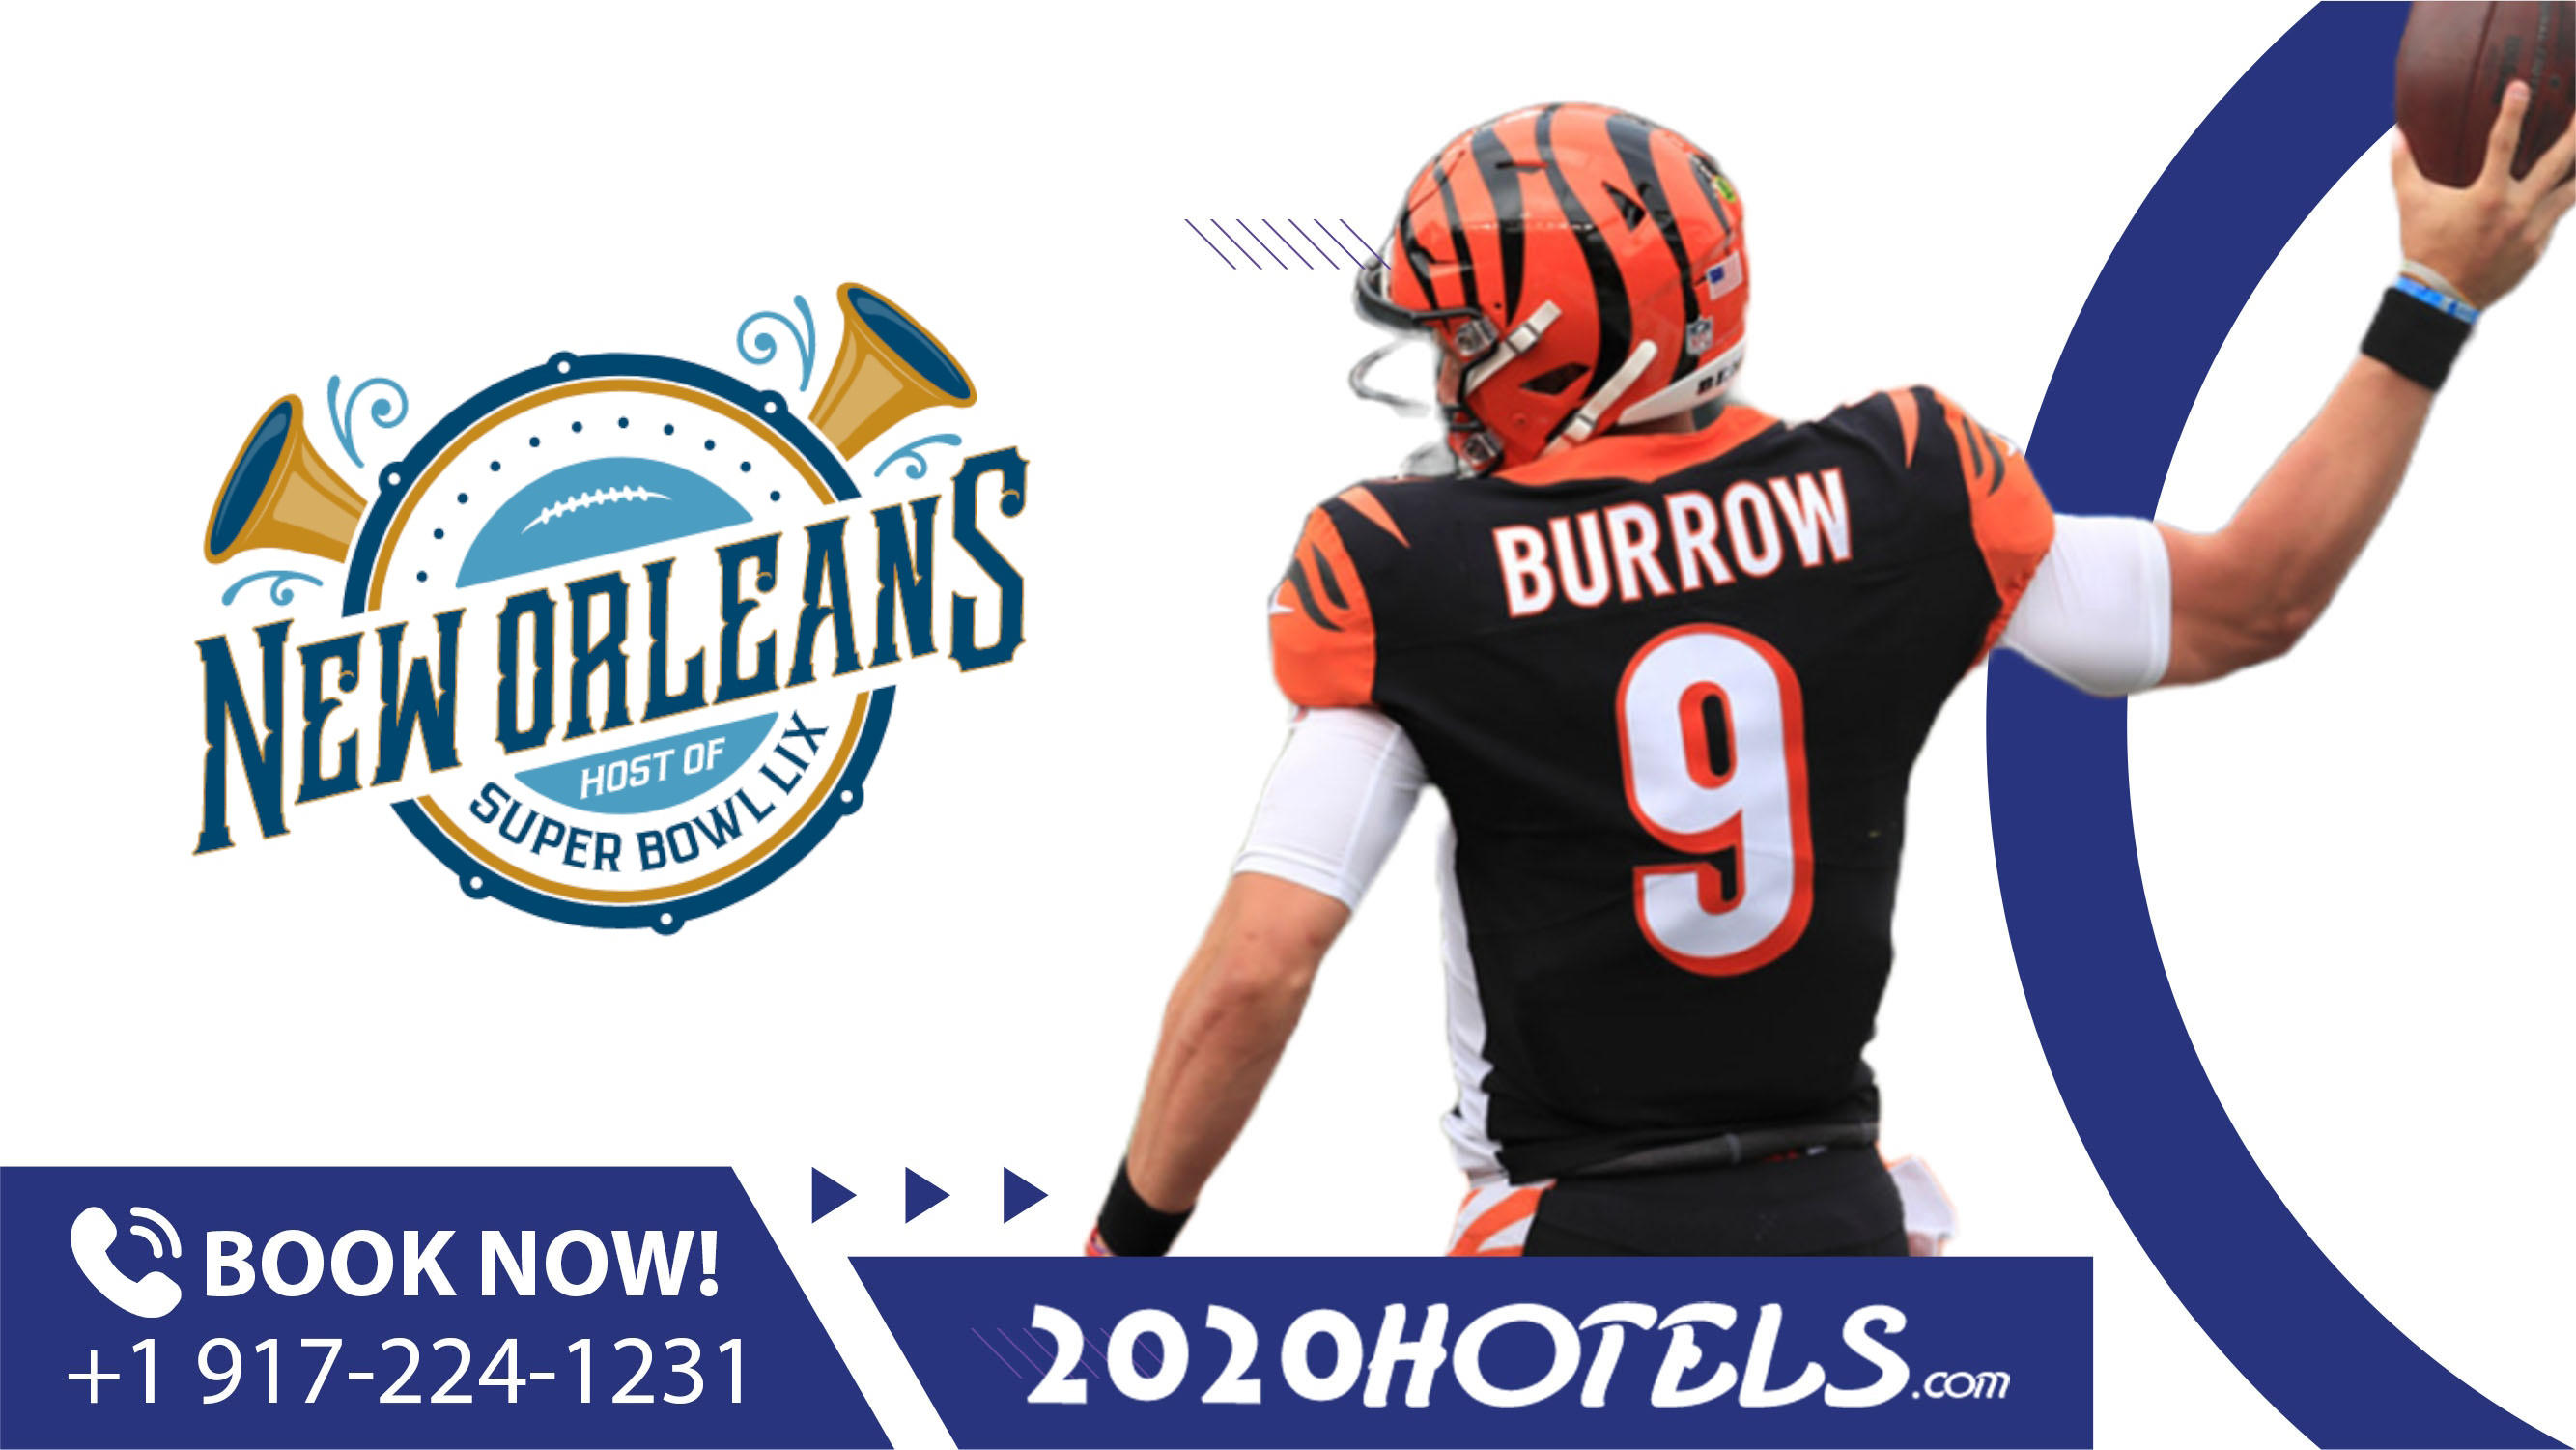 Click Here & Get Ready for Super Bowl LIX in New Orleans, LA.